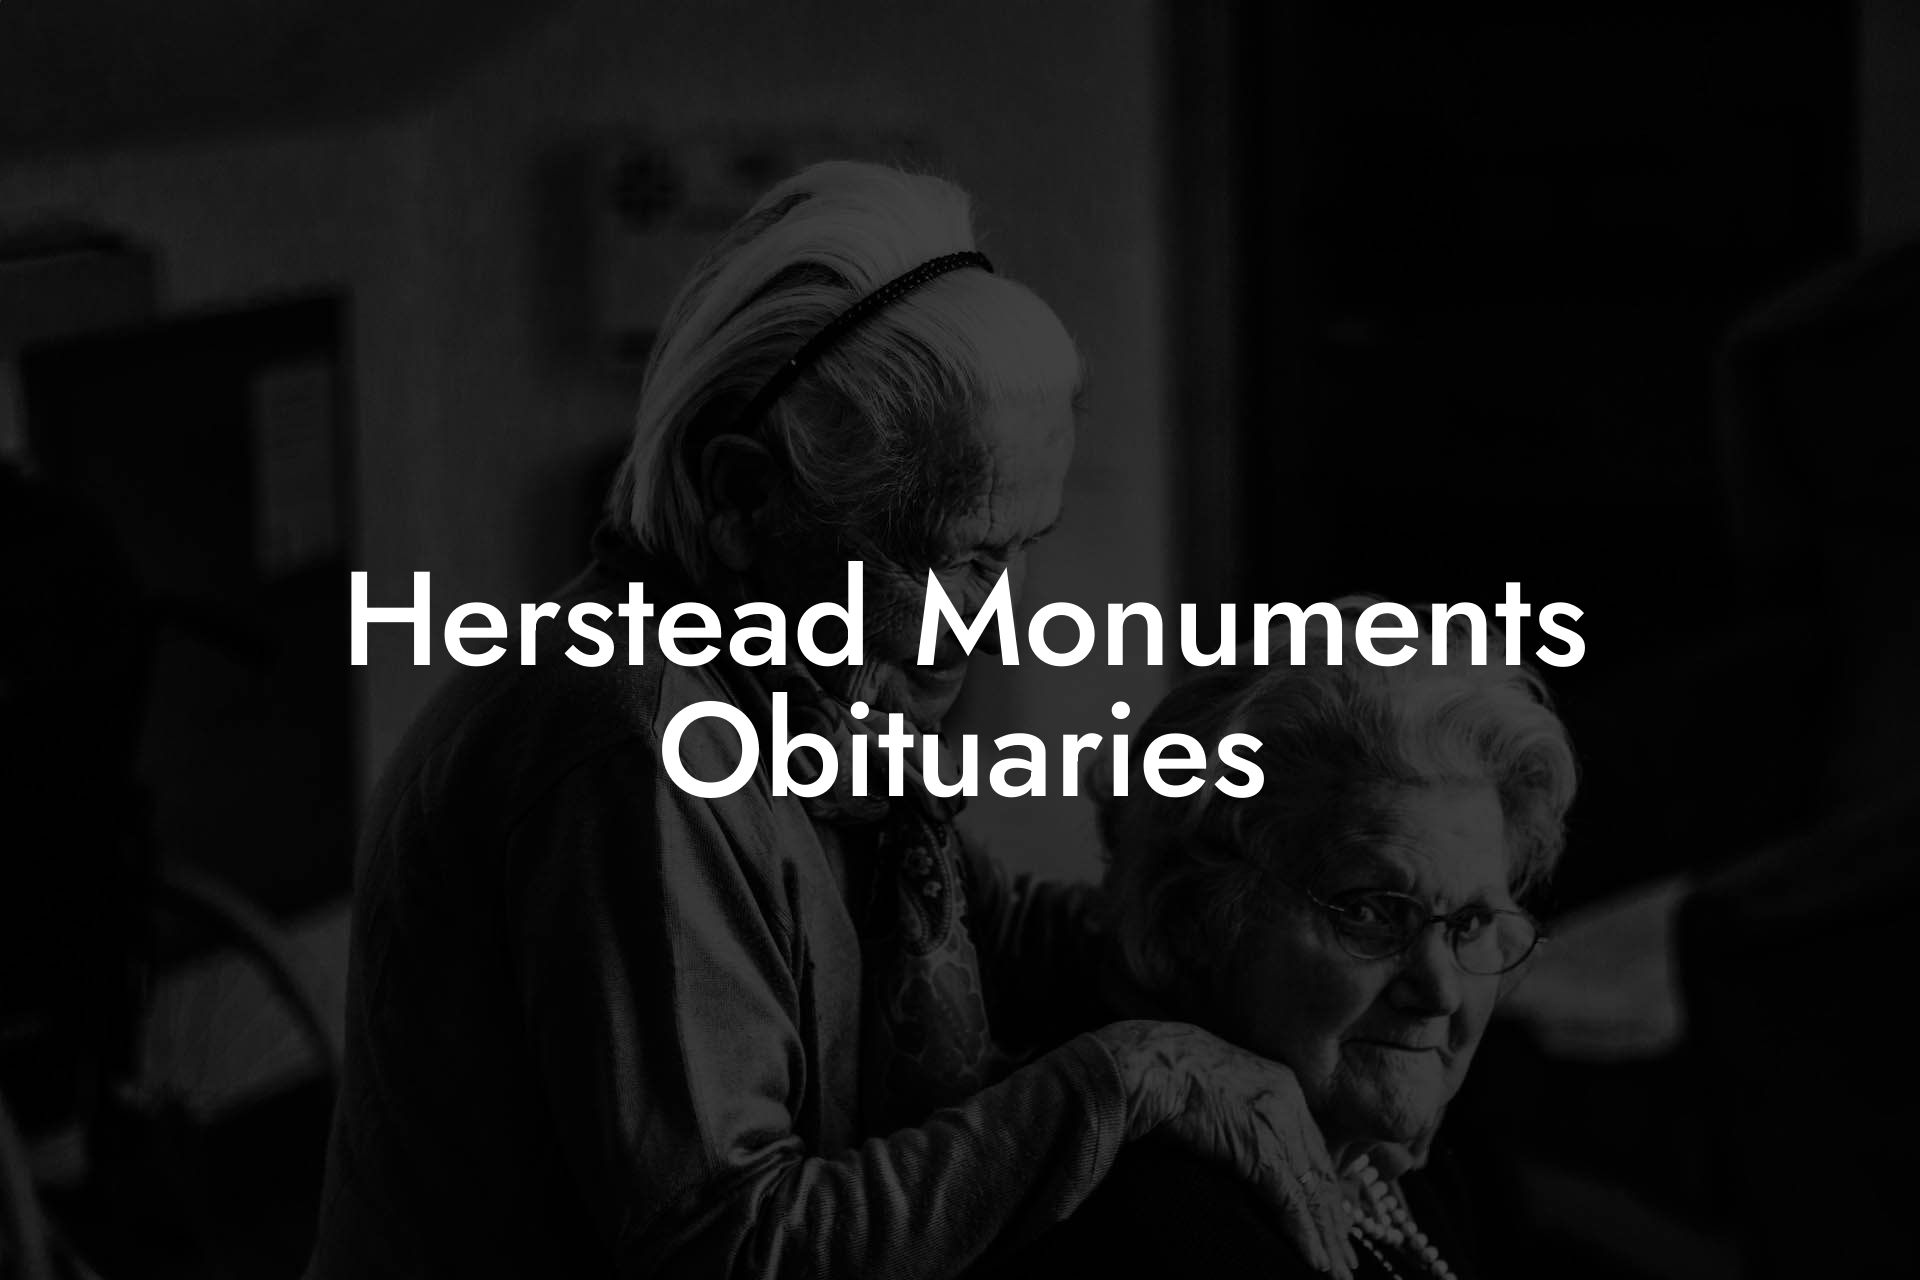 Herstead Monuments Obituaries